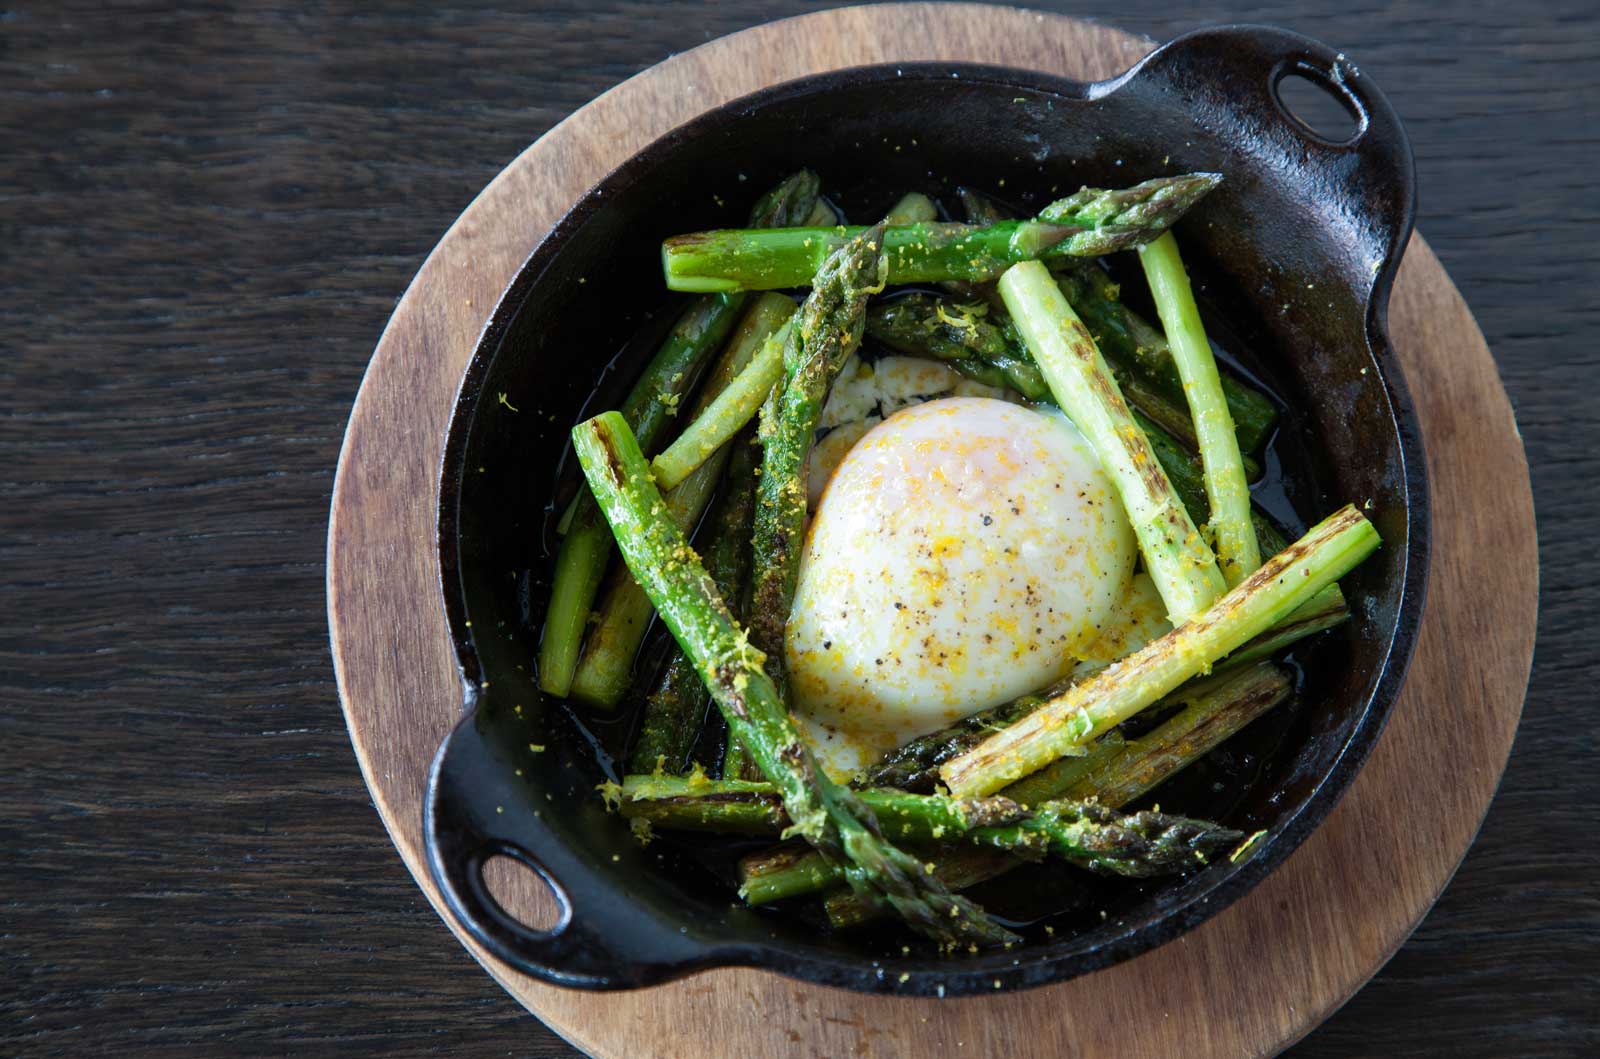 Egg and asparagus at The 404 Kitchen in Nashville